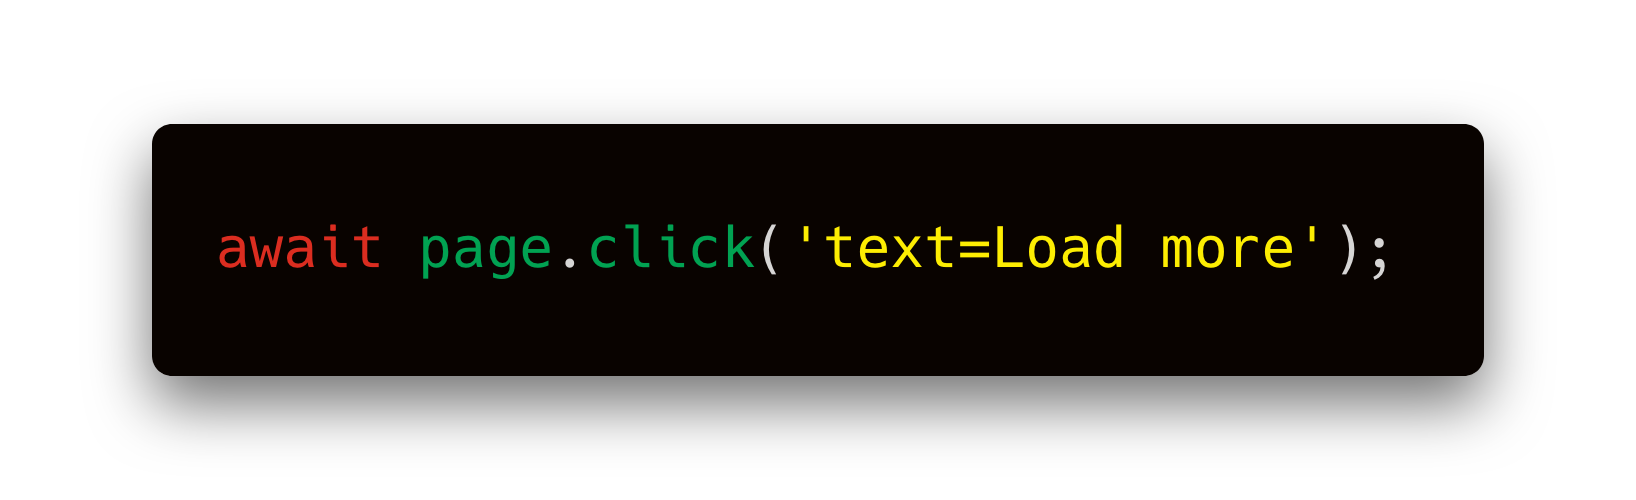 Playwright javascript code for awaiting click on the load more button.